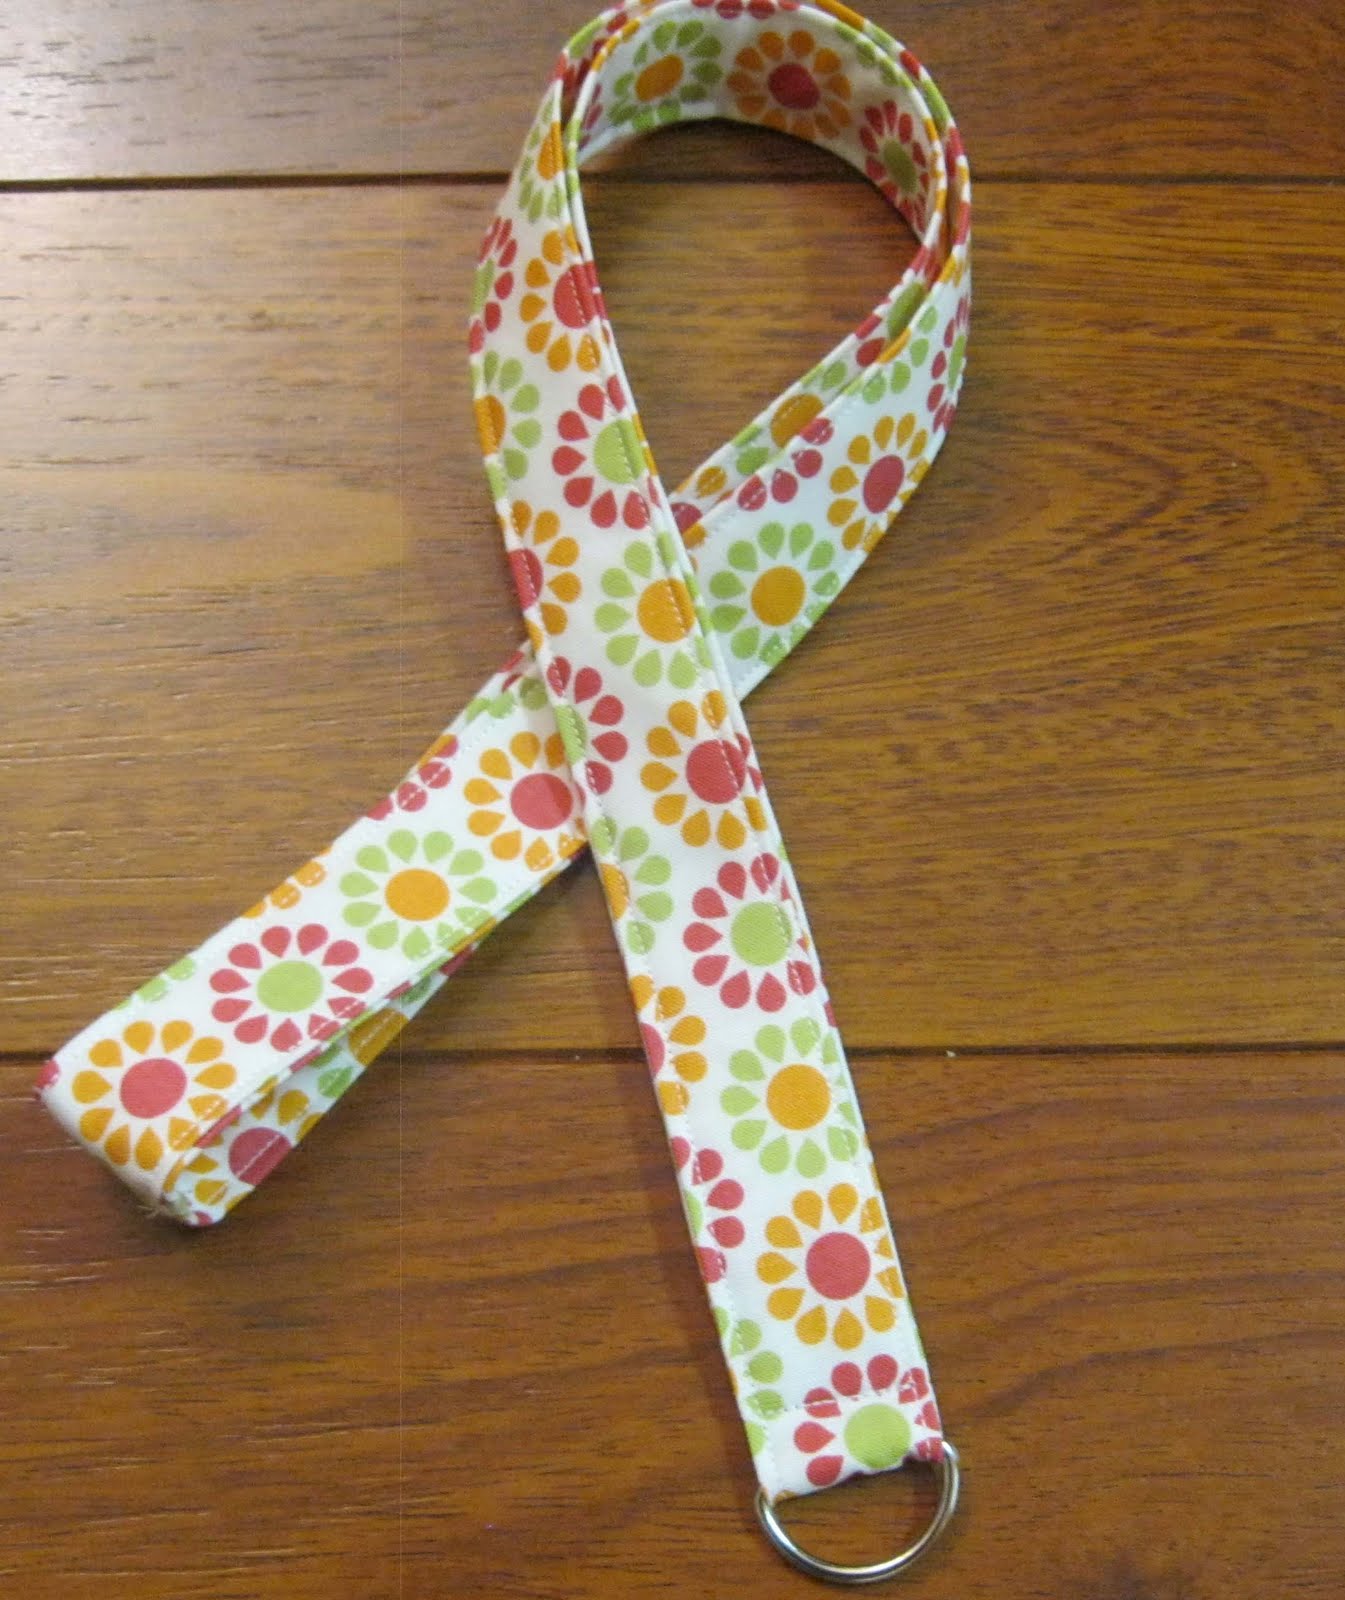 Quilts and Jewels: Fabric Lanyard